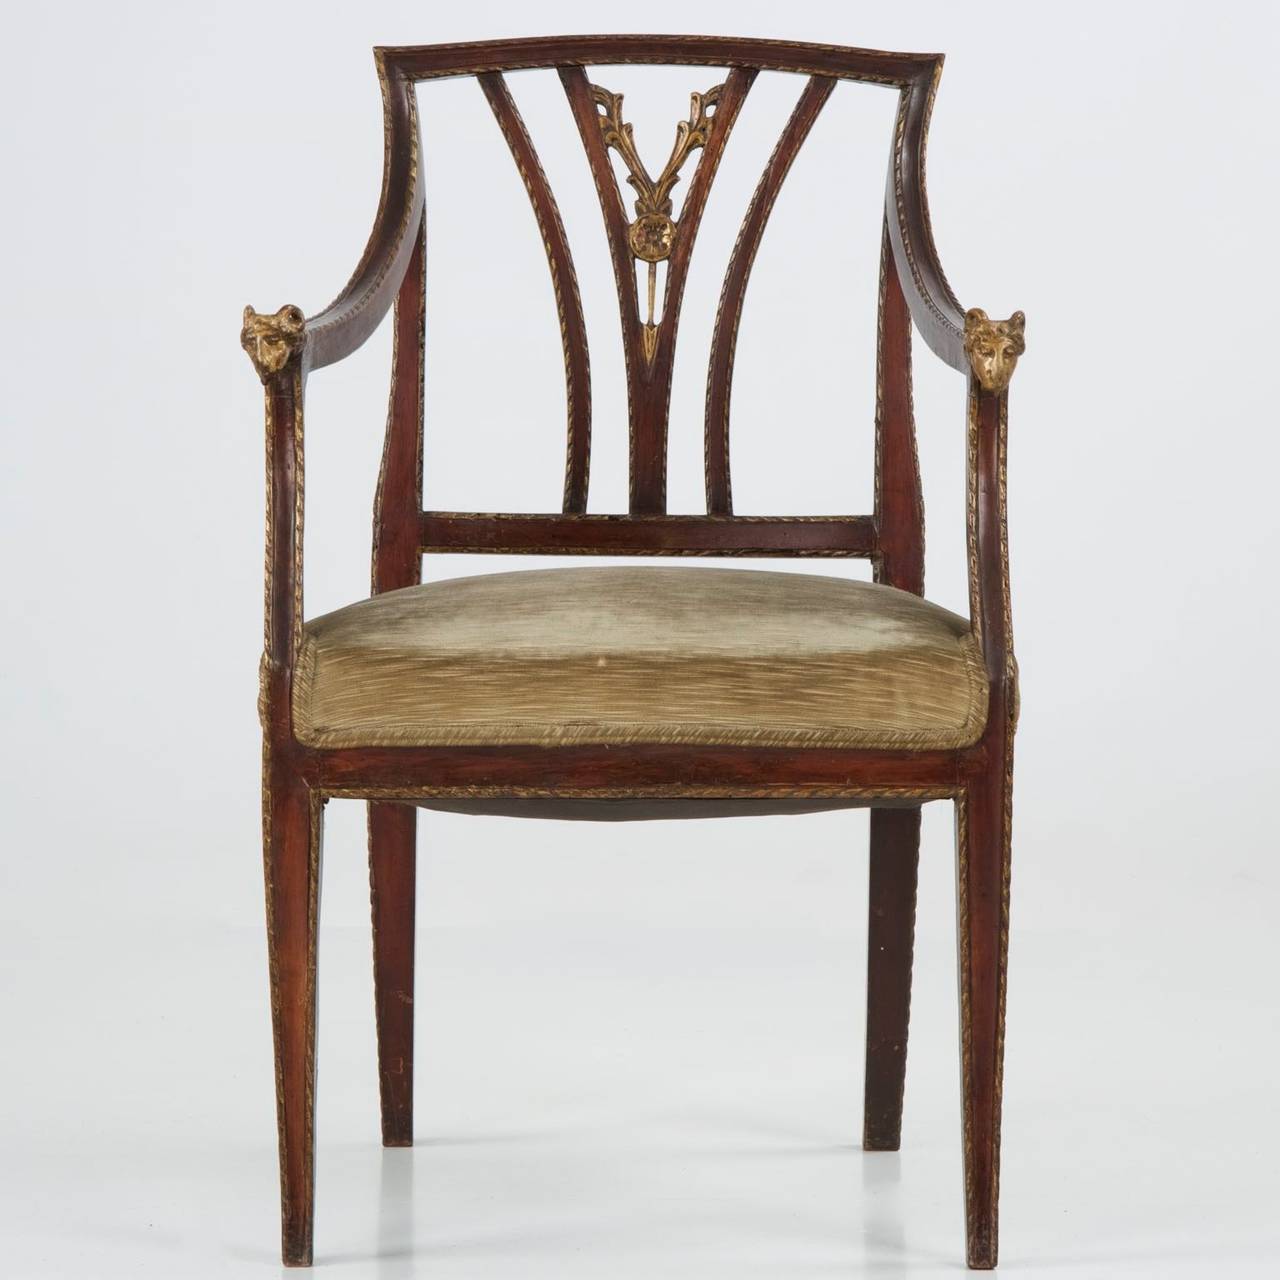 Probably circulating from the middle of the 19th Century, this beautiful Italian Neoclassical arm chair is intricately carved in the pierced splat. The hand tooling marks remain mostly unfinished in the secondary portions of the carvings, the uneven